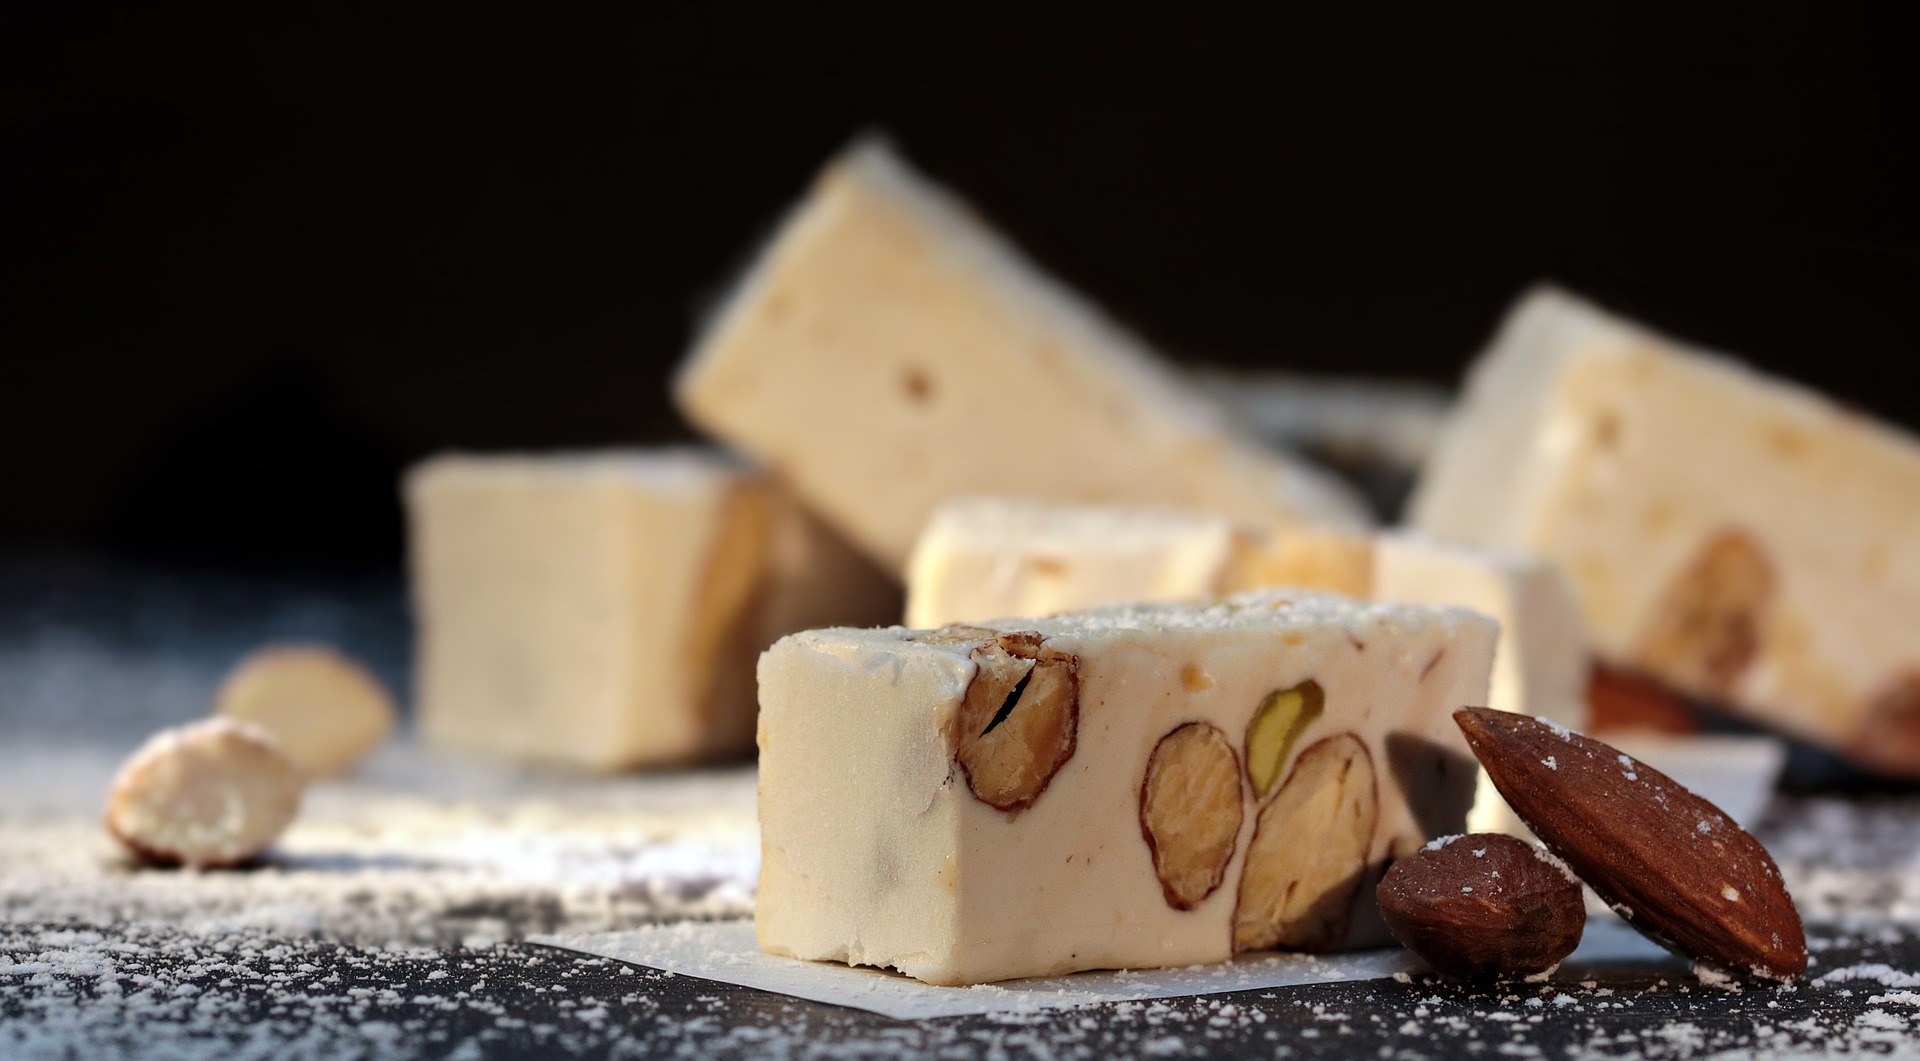 turron is a great snack